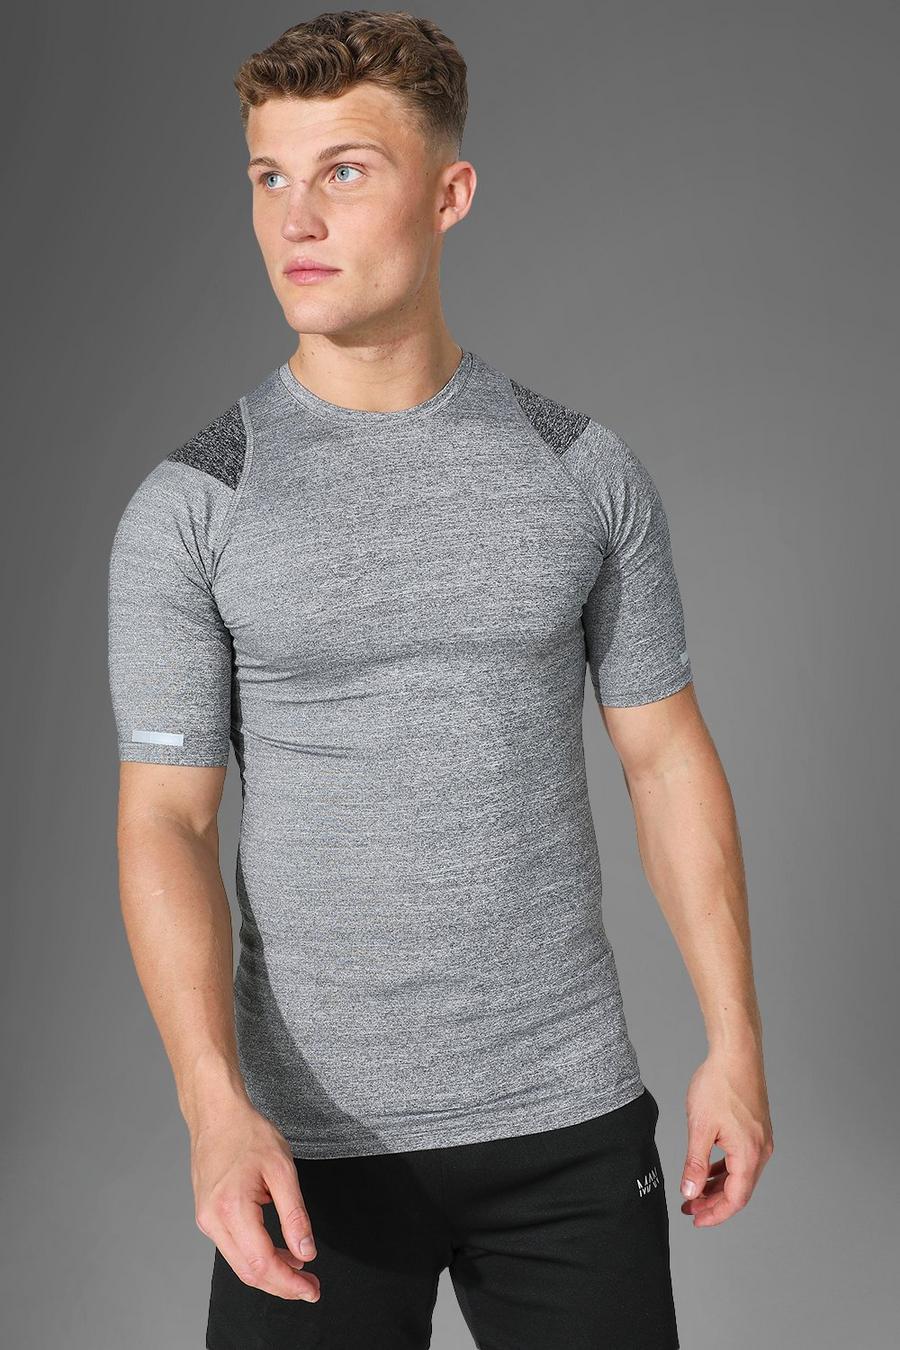 T-shirt Man Active Gym a compressione a contrasto, Charcoal grey image number 1